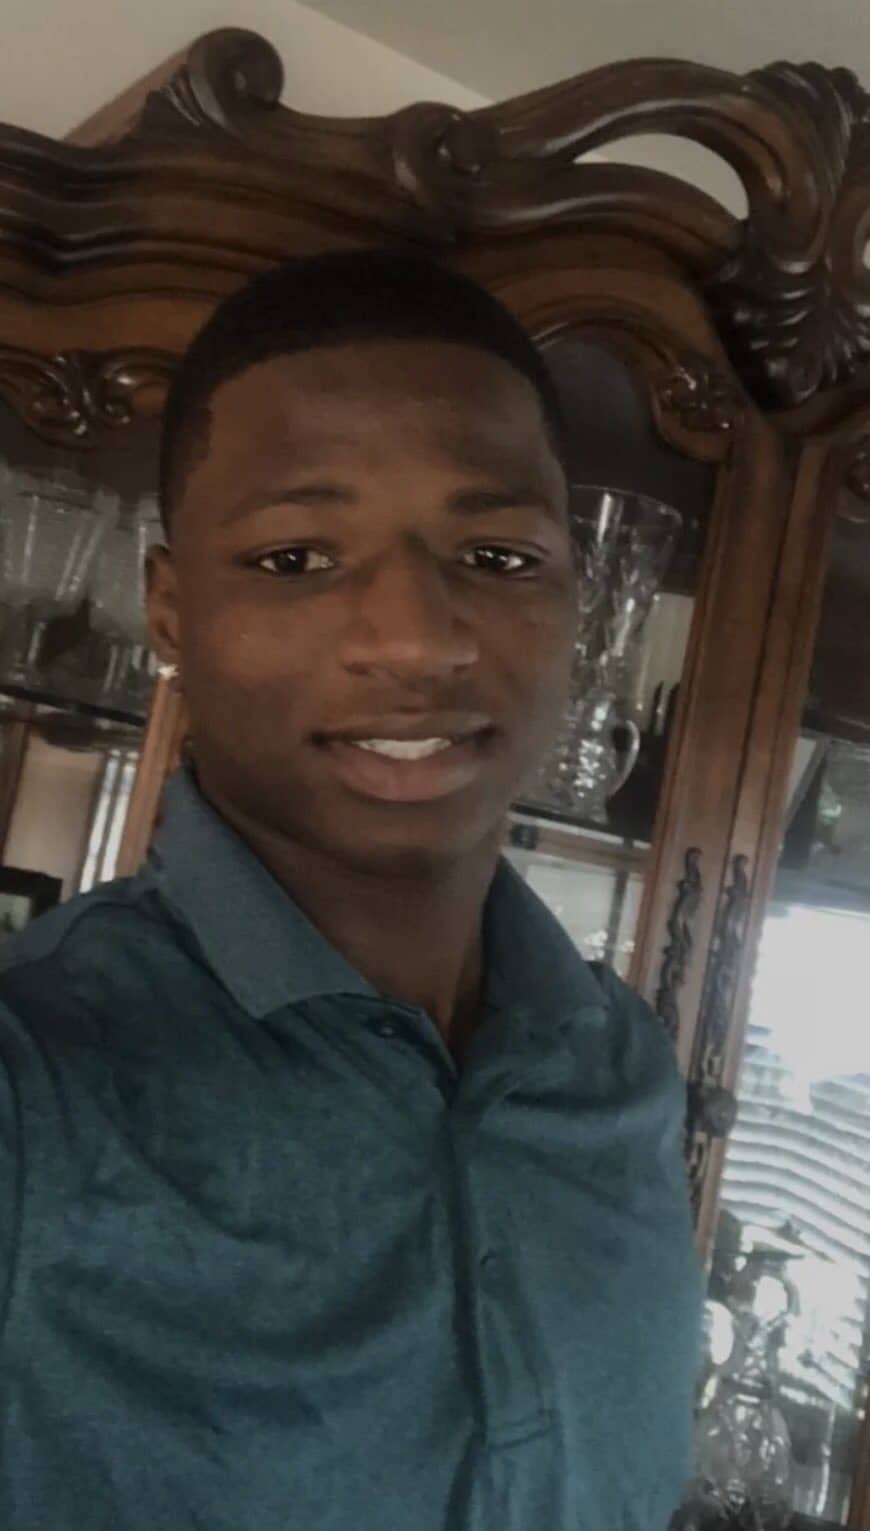 22-Year-Old Nevan Baker’s Death Ruled A Suicide After He Was Found Hanging From A Tree In Orlando—His Family Doesn’t Believe He Would Take His Life